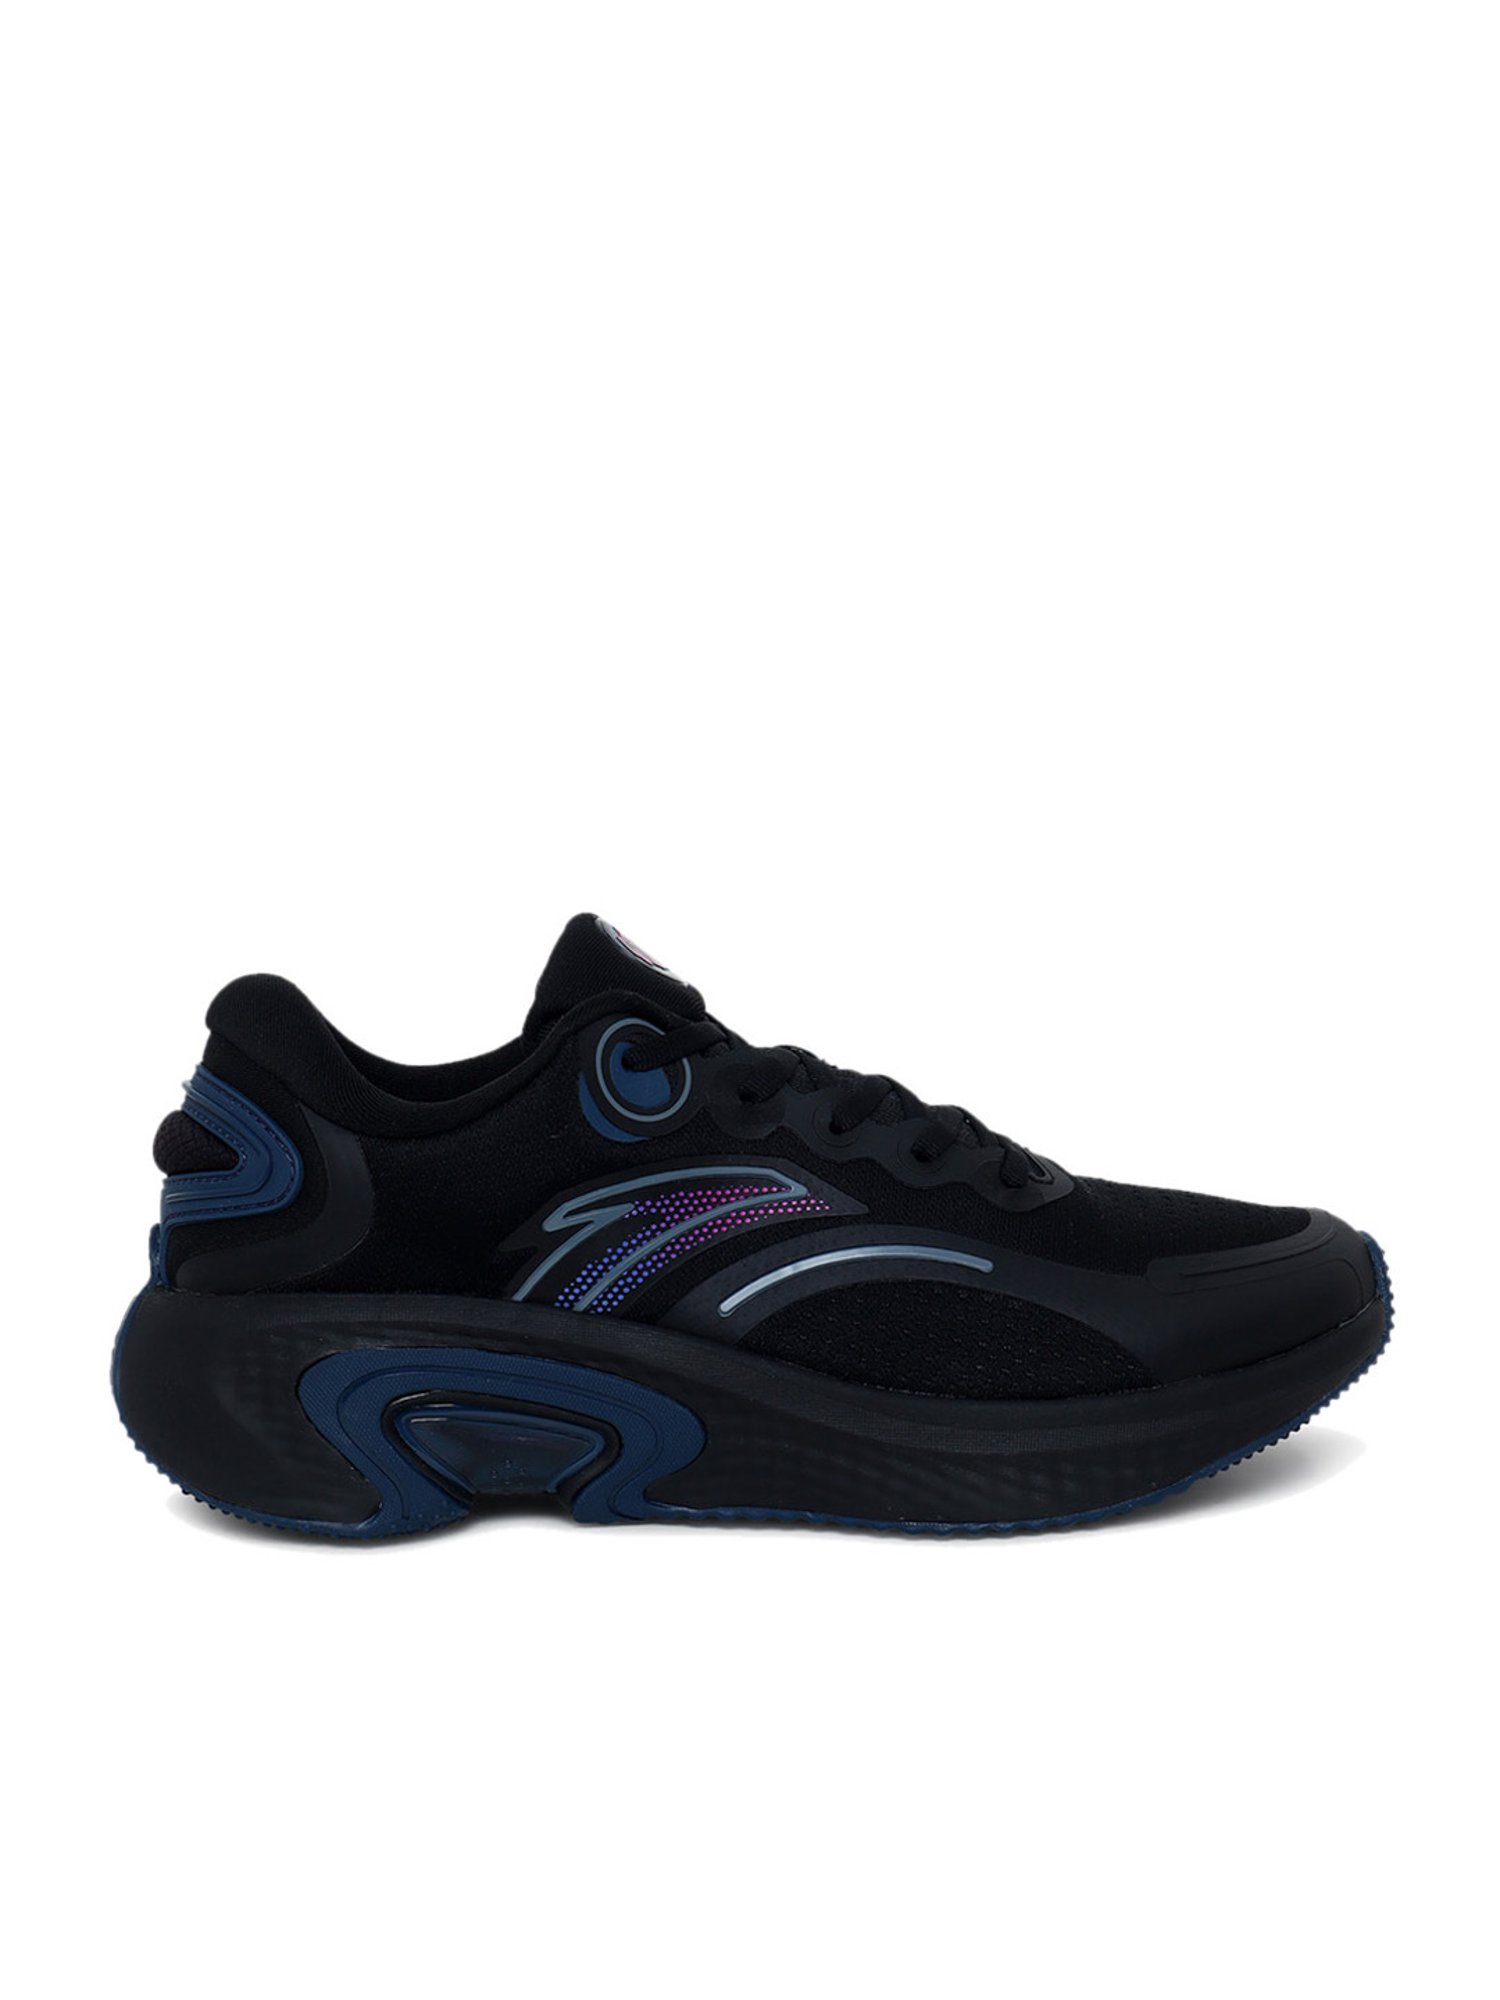 Buy Men's Anta A-Silo Running Shoes Online